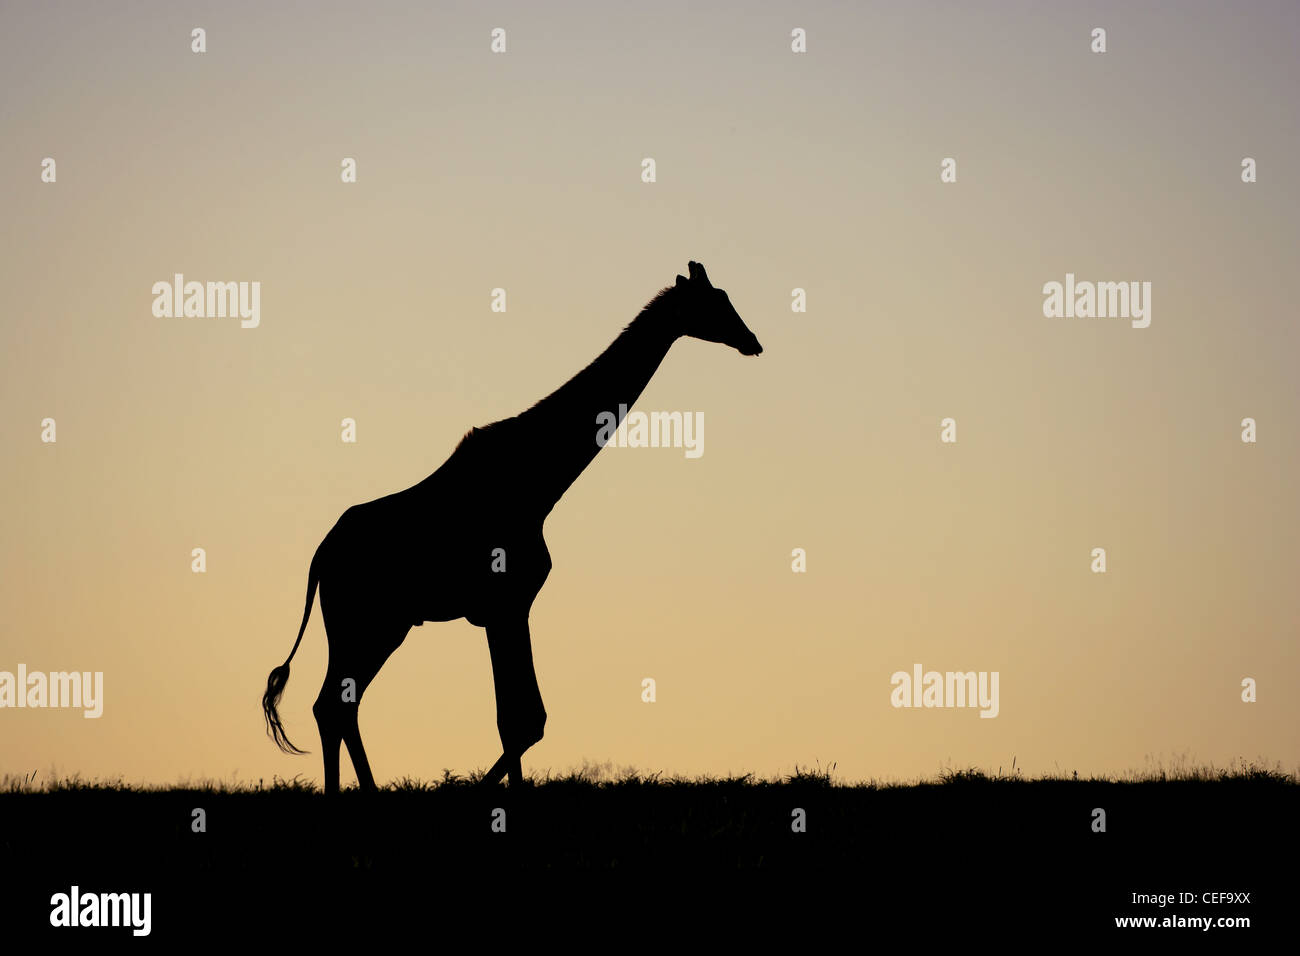 Silhouette of a giraffe walking on the African plains at sunset Stock Photo